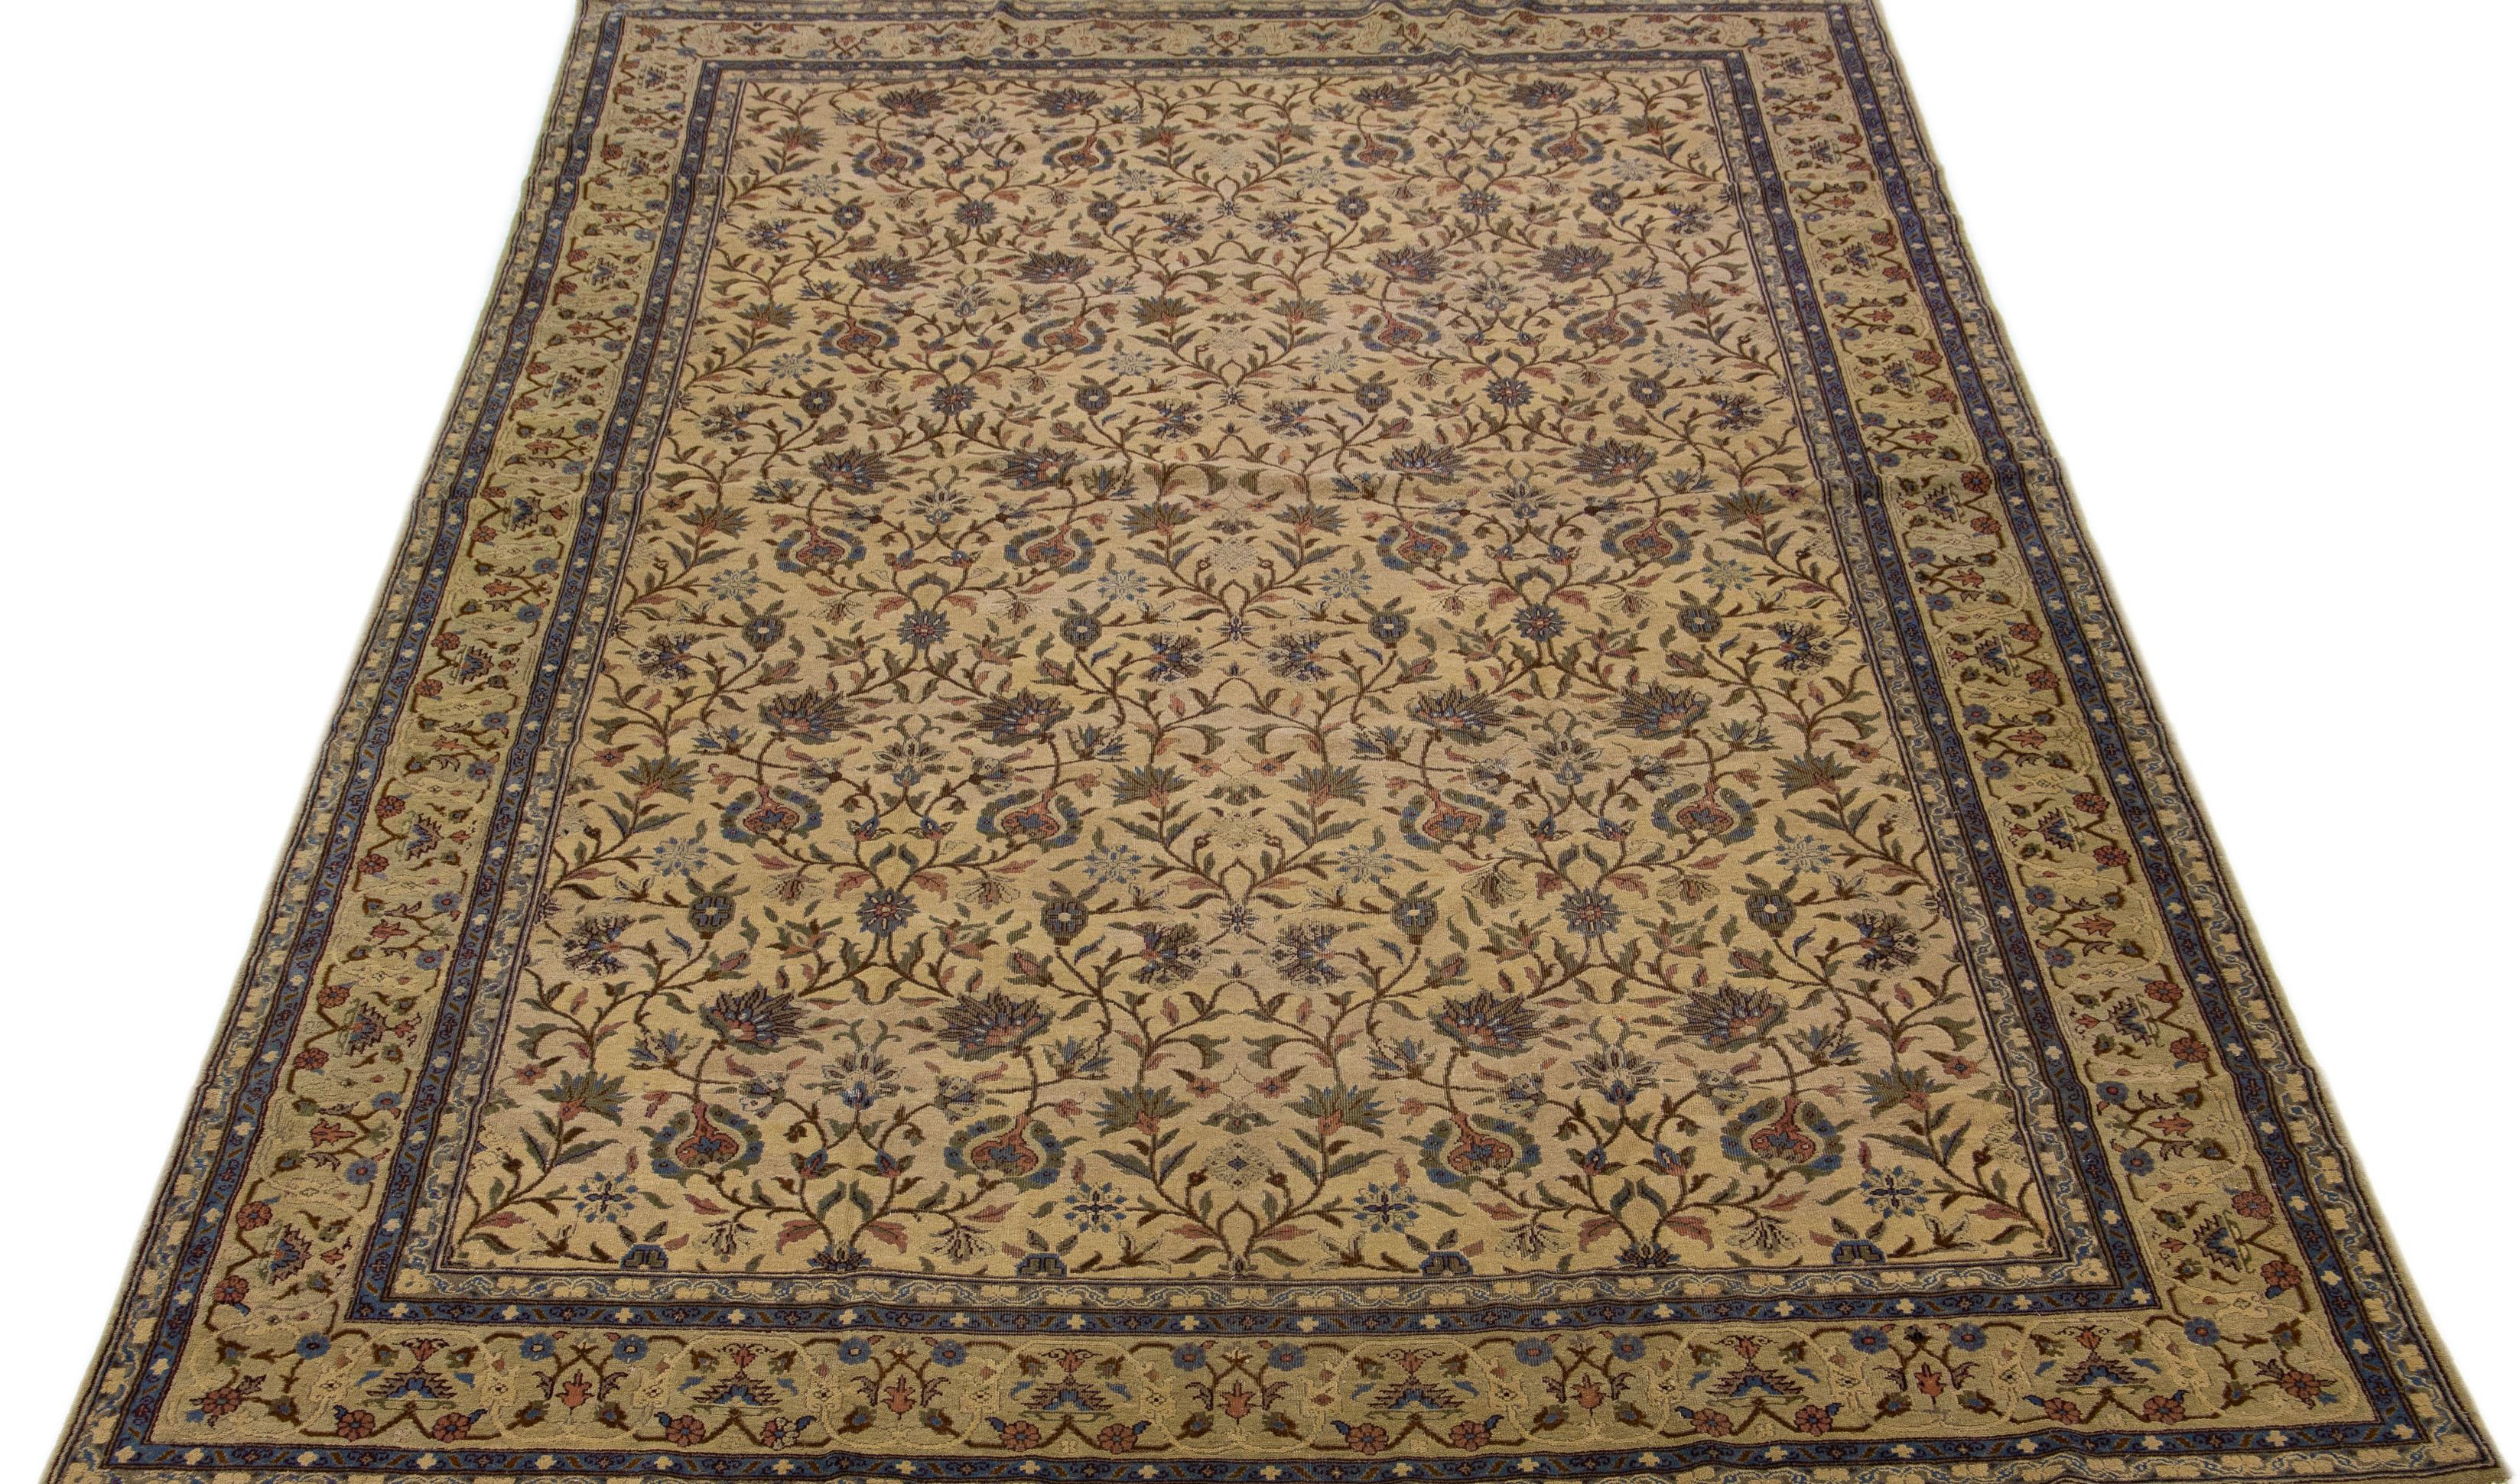 This hand-knotted wool rug boasts a beautiful vintage Turkish design featuring a light brown field color accentuated with stunning green, blue, and pink accents in an elegant all-over floral pattern.

This rug measures 10'7